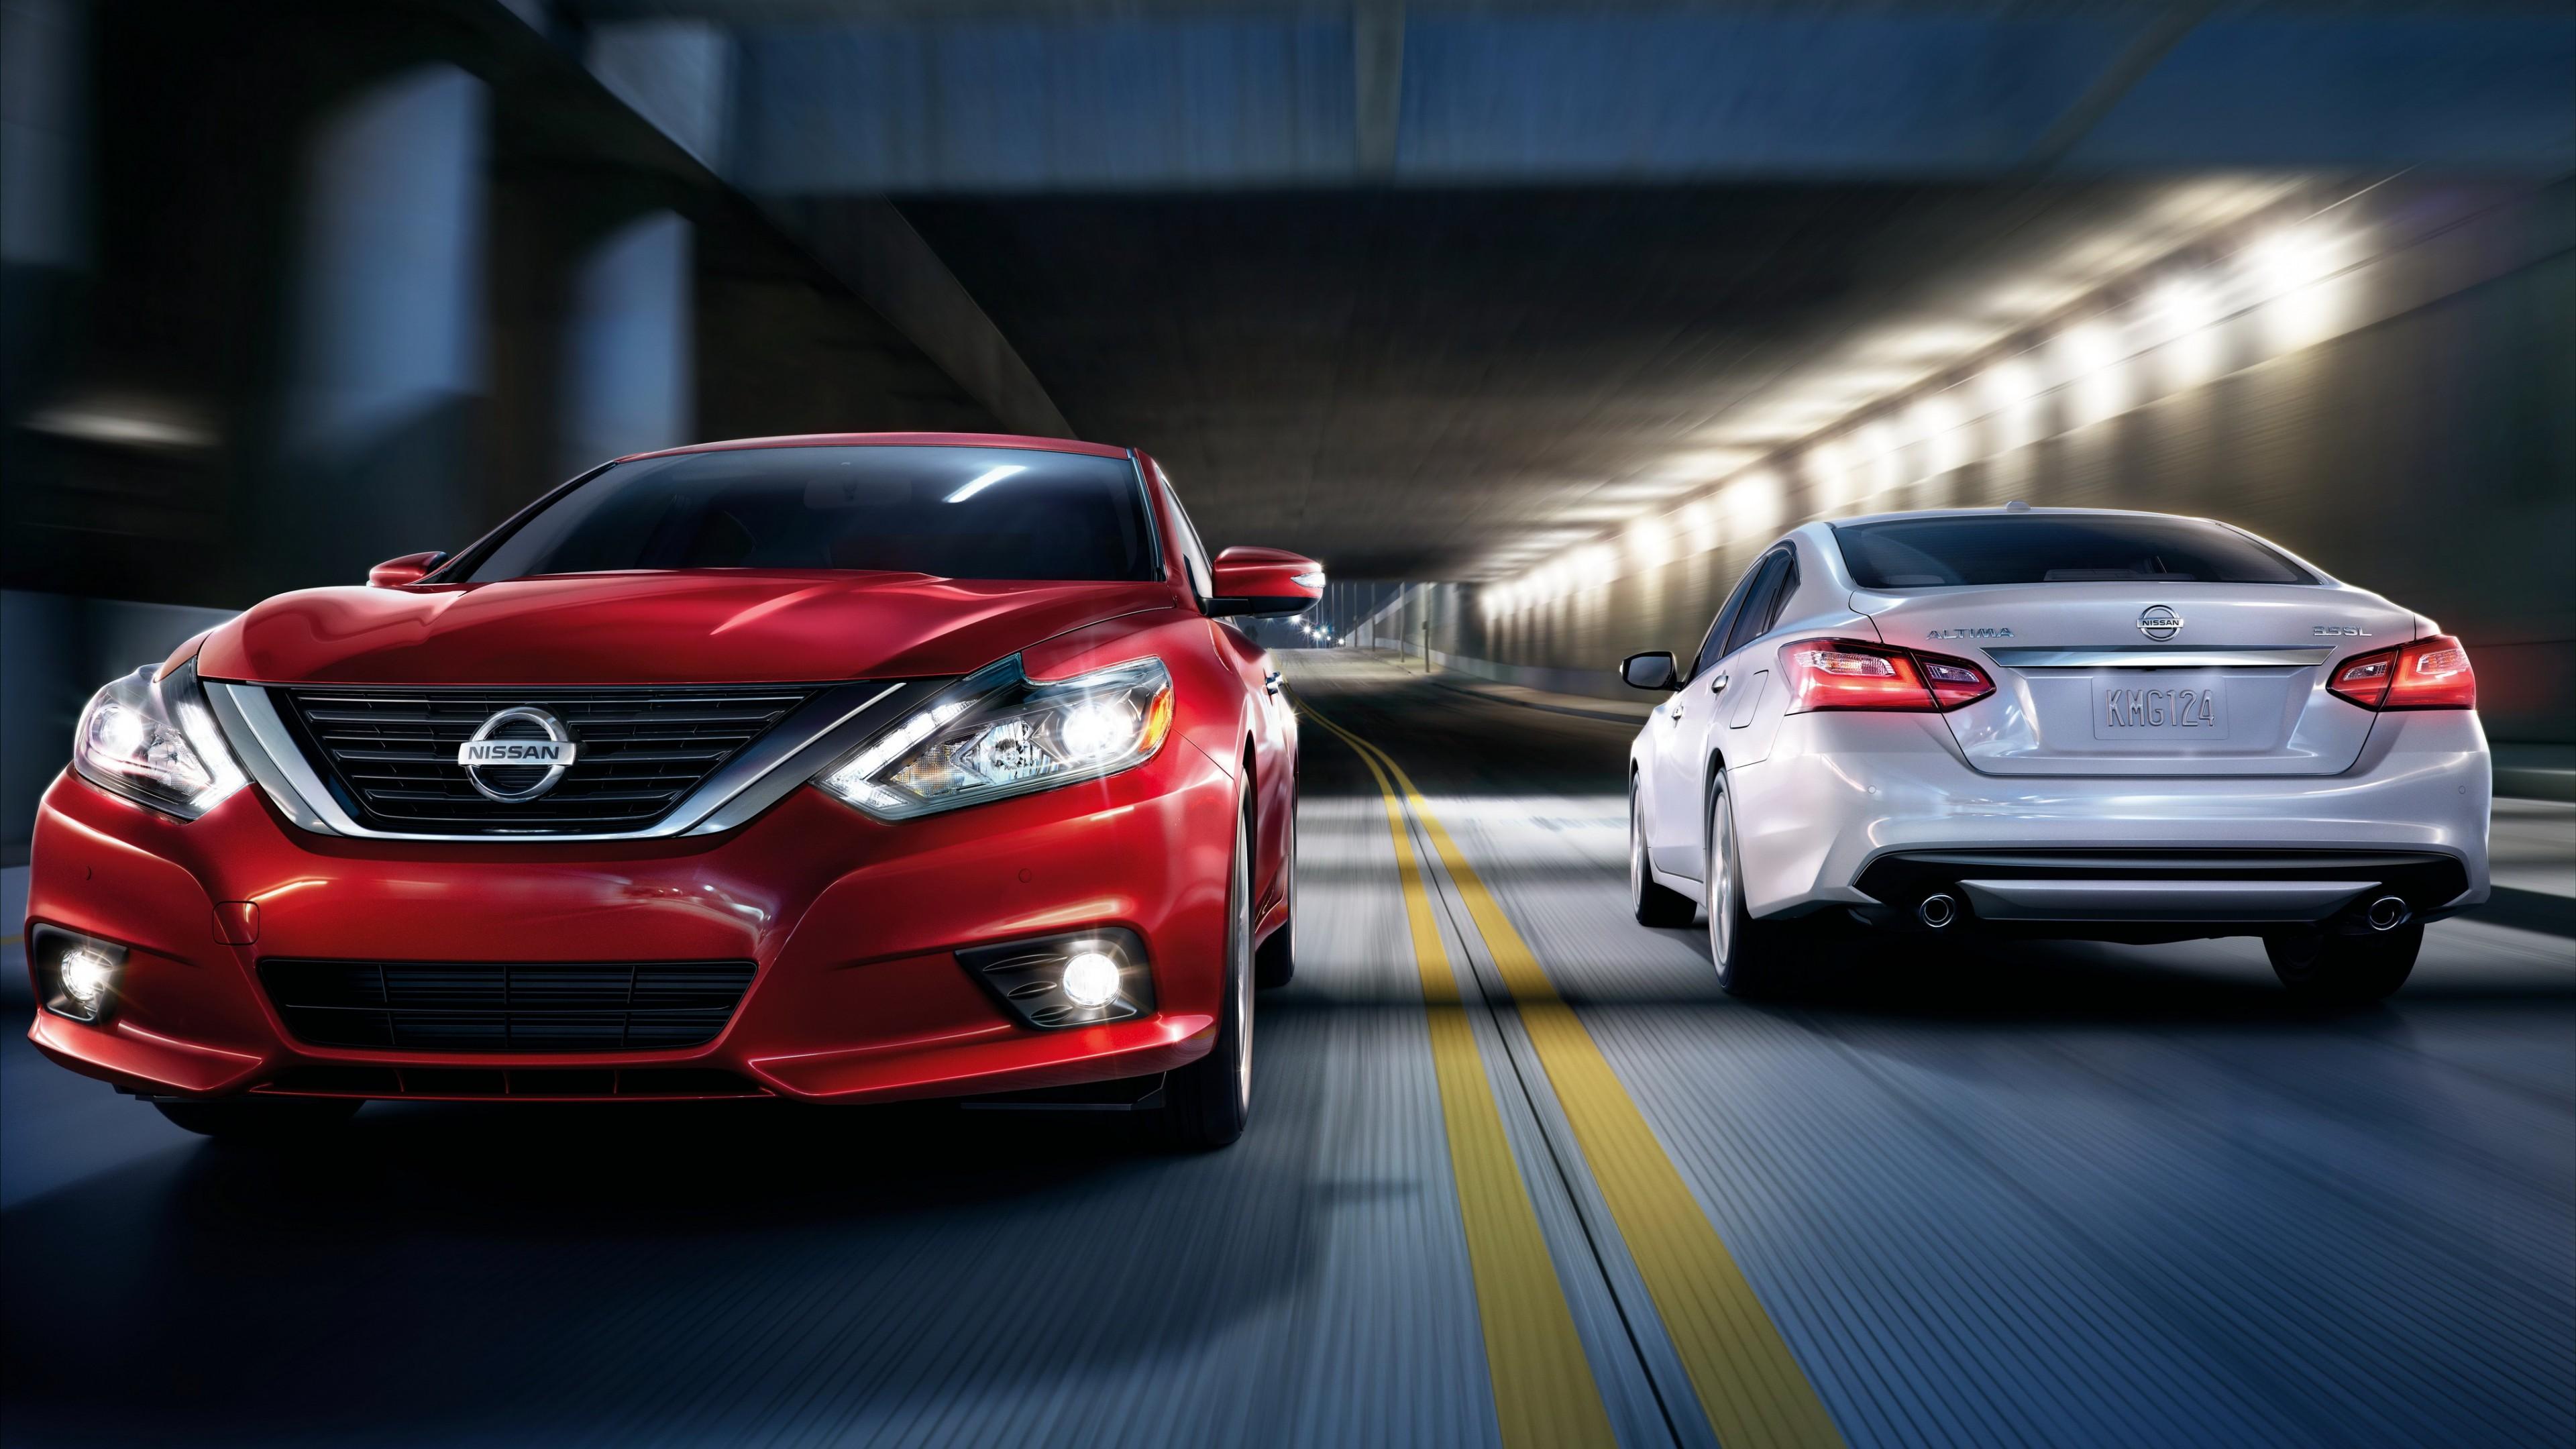 Wallpaper Nissan Altima, red, speed, Cars & Bikes